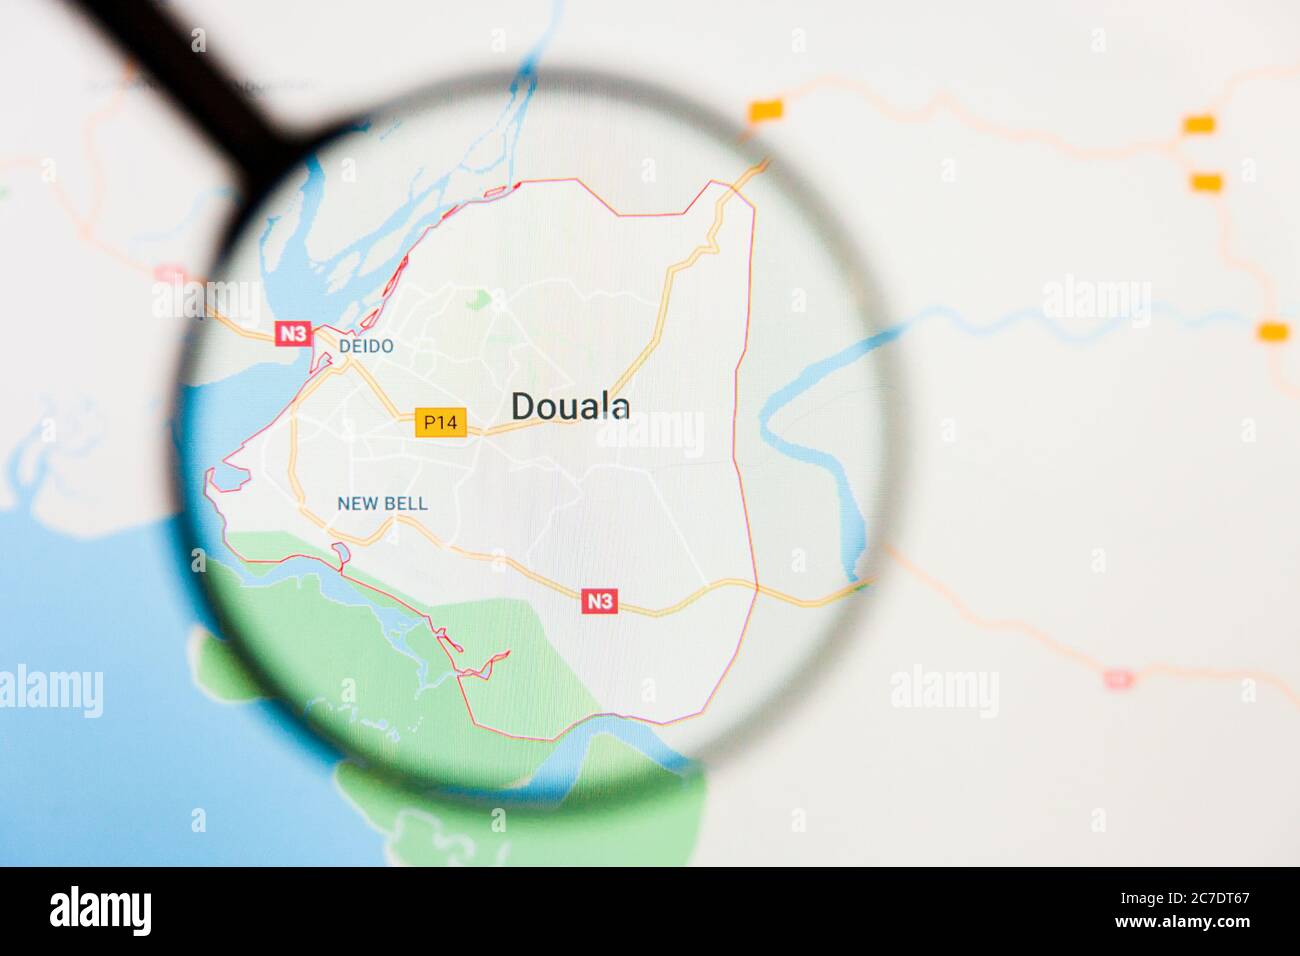 Douala, Cameroon city visualization illustrative concept on display screen through magnifying glass Stock Photo